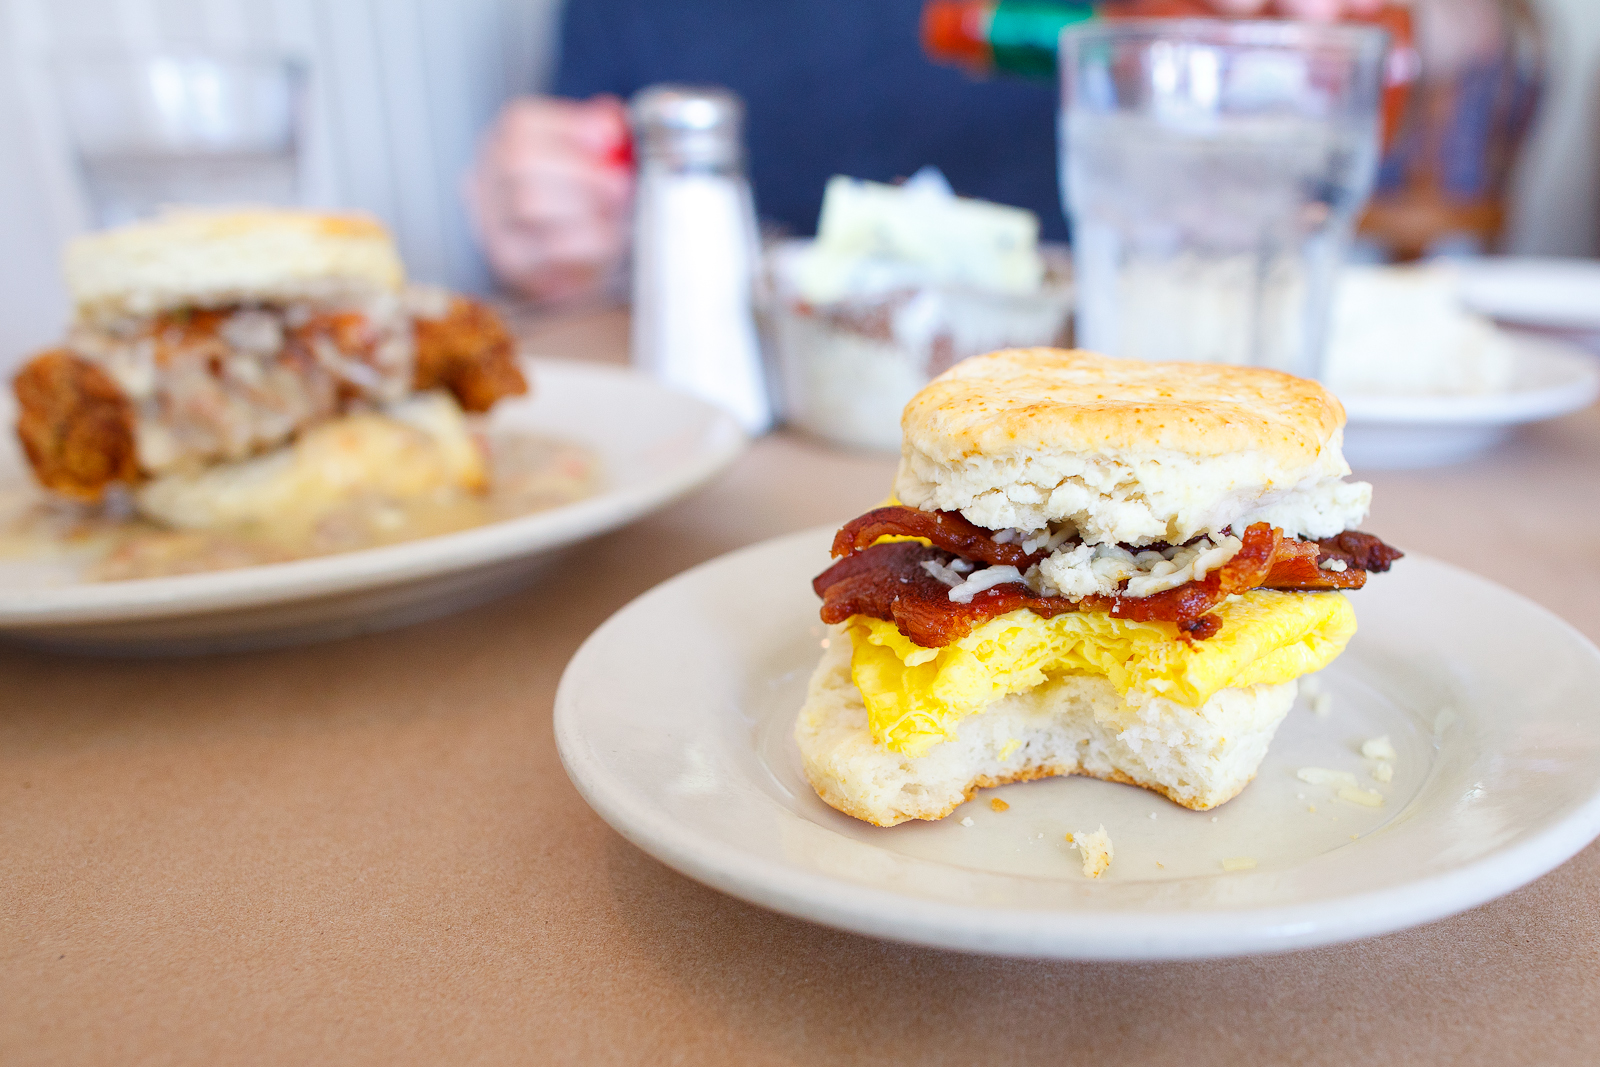 Egg biscuit with cheese and double-cut bacon ($6)